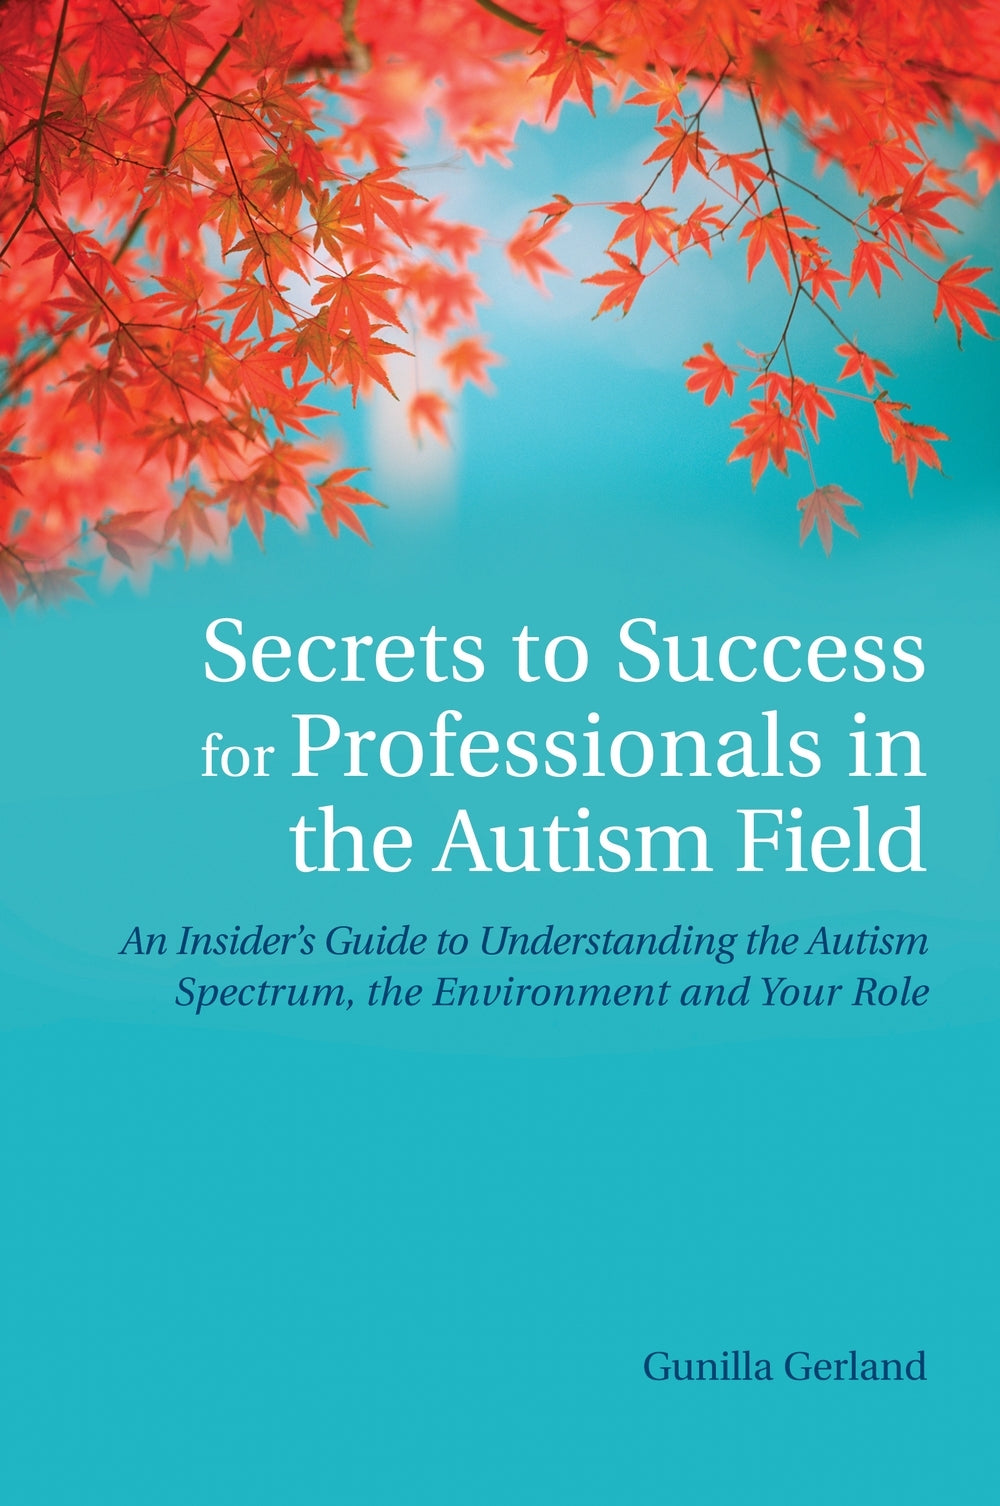 Secrets to Success for Professionals in the Autism Field by Gunilla Gerland